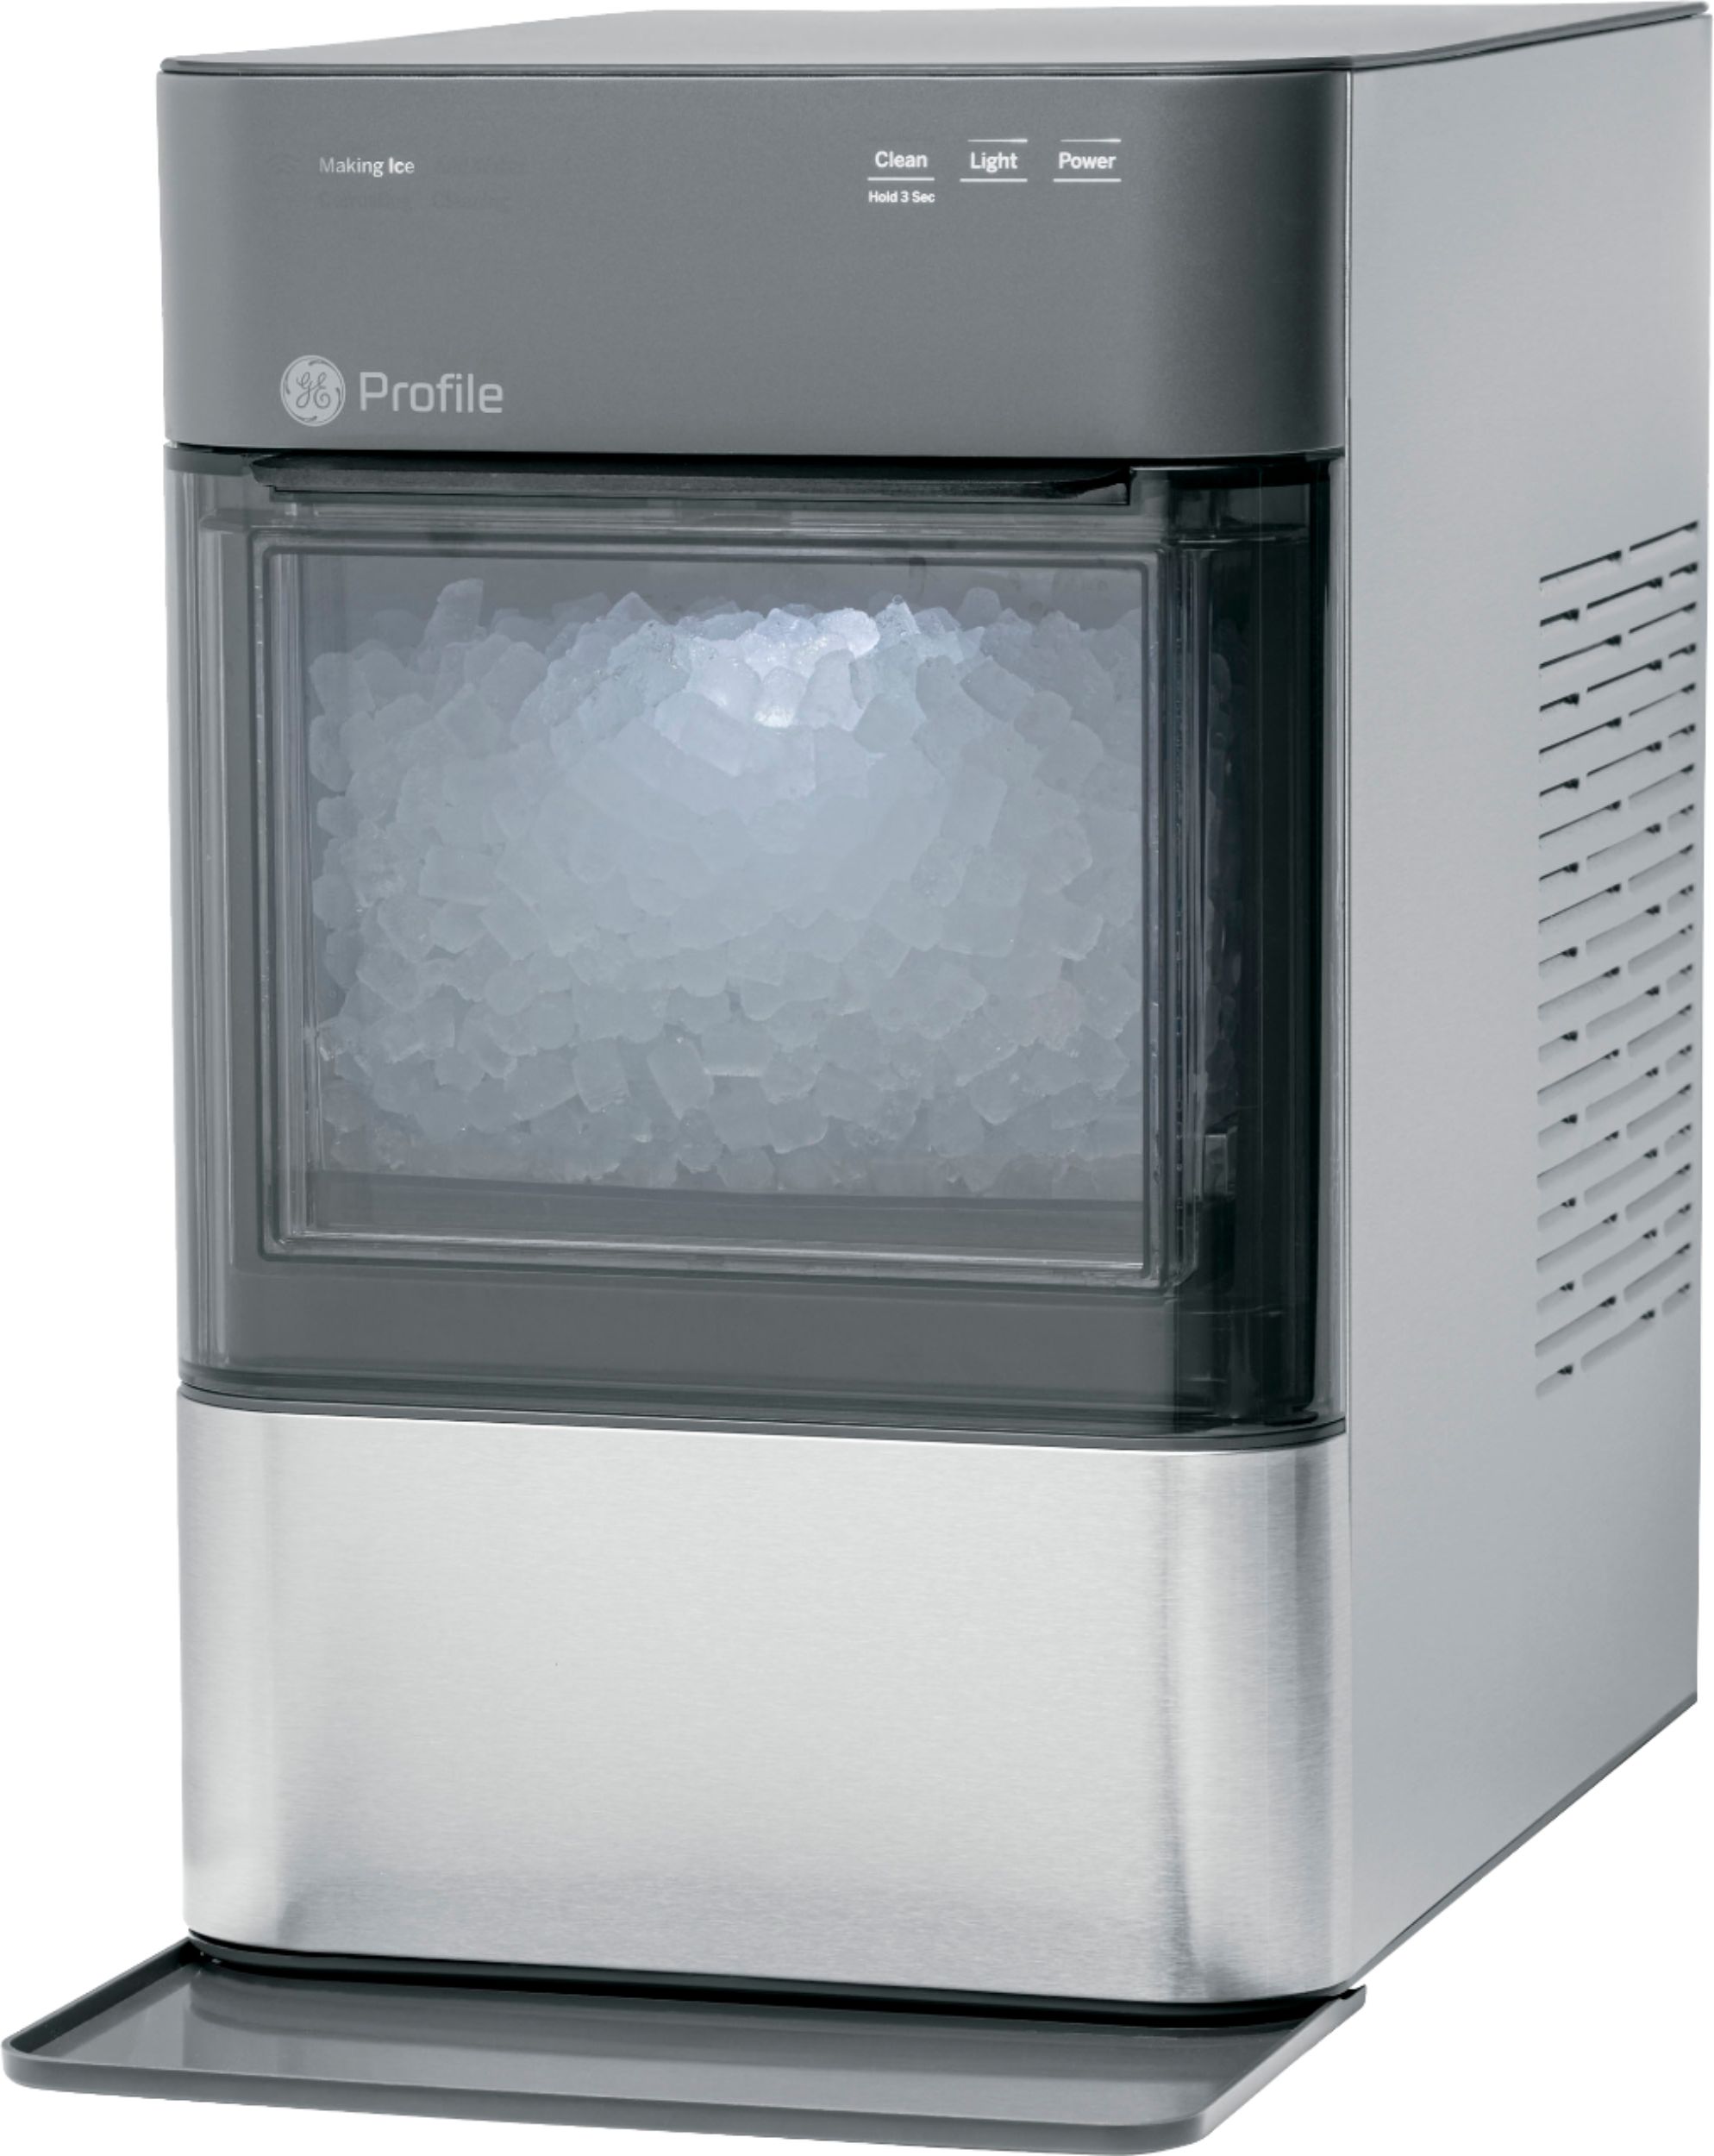 Opal Nugget Ice Maker 1.0 vs 2.0 - Differences/Similarities